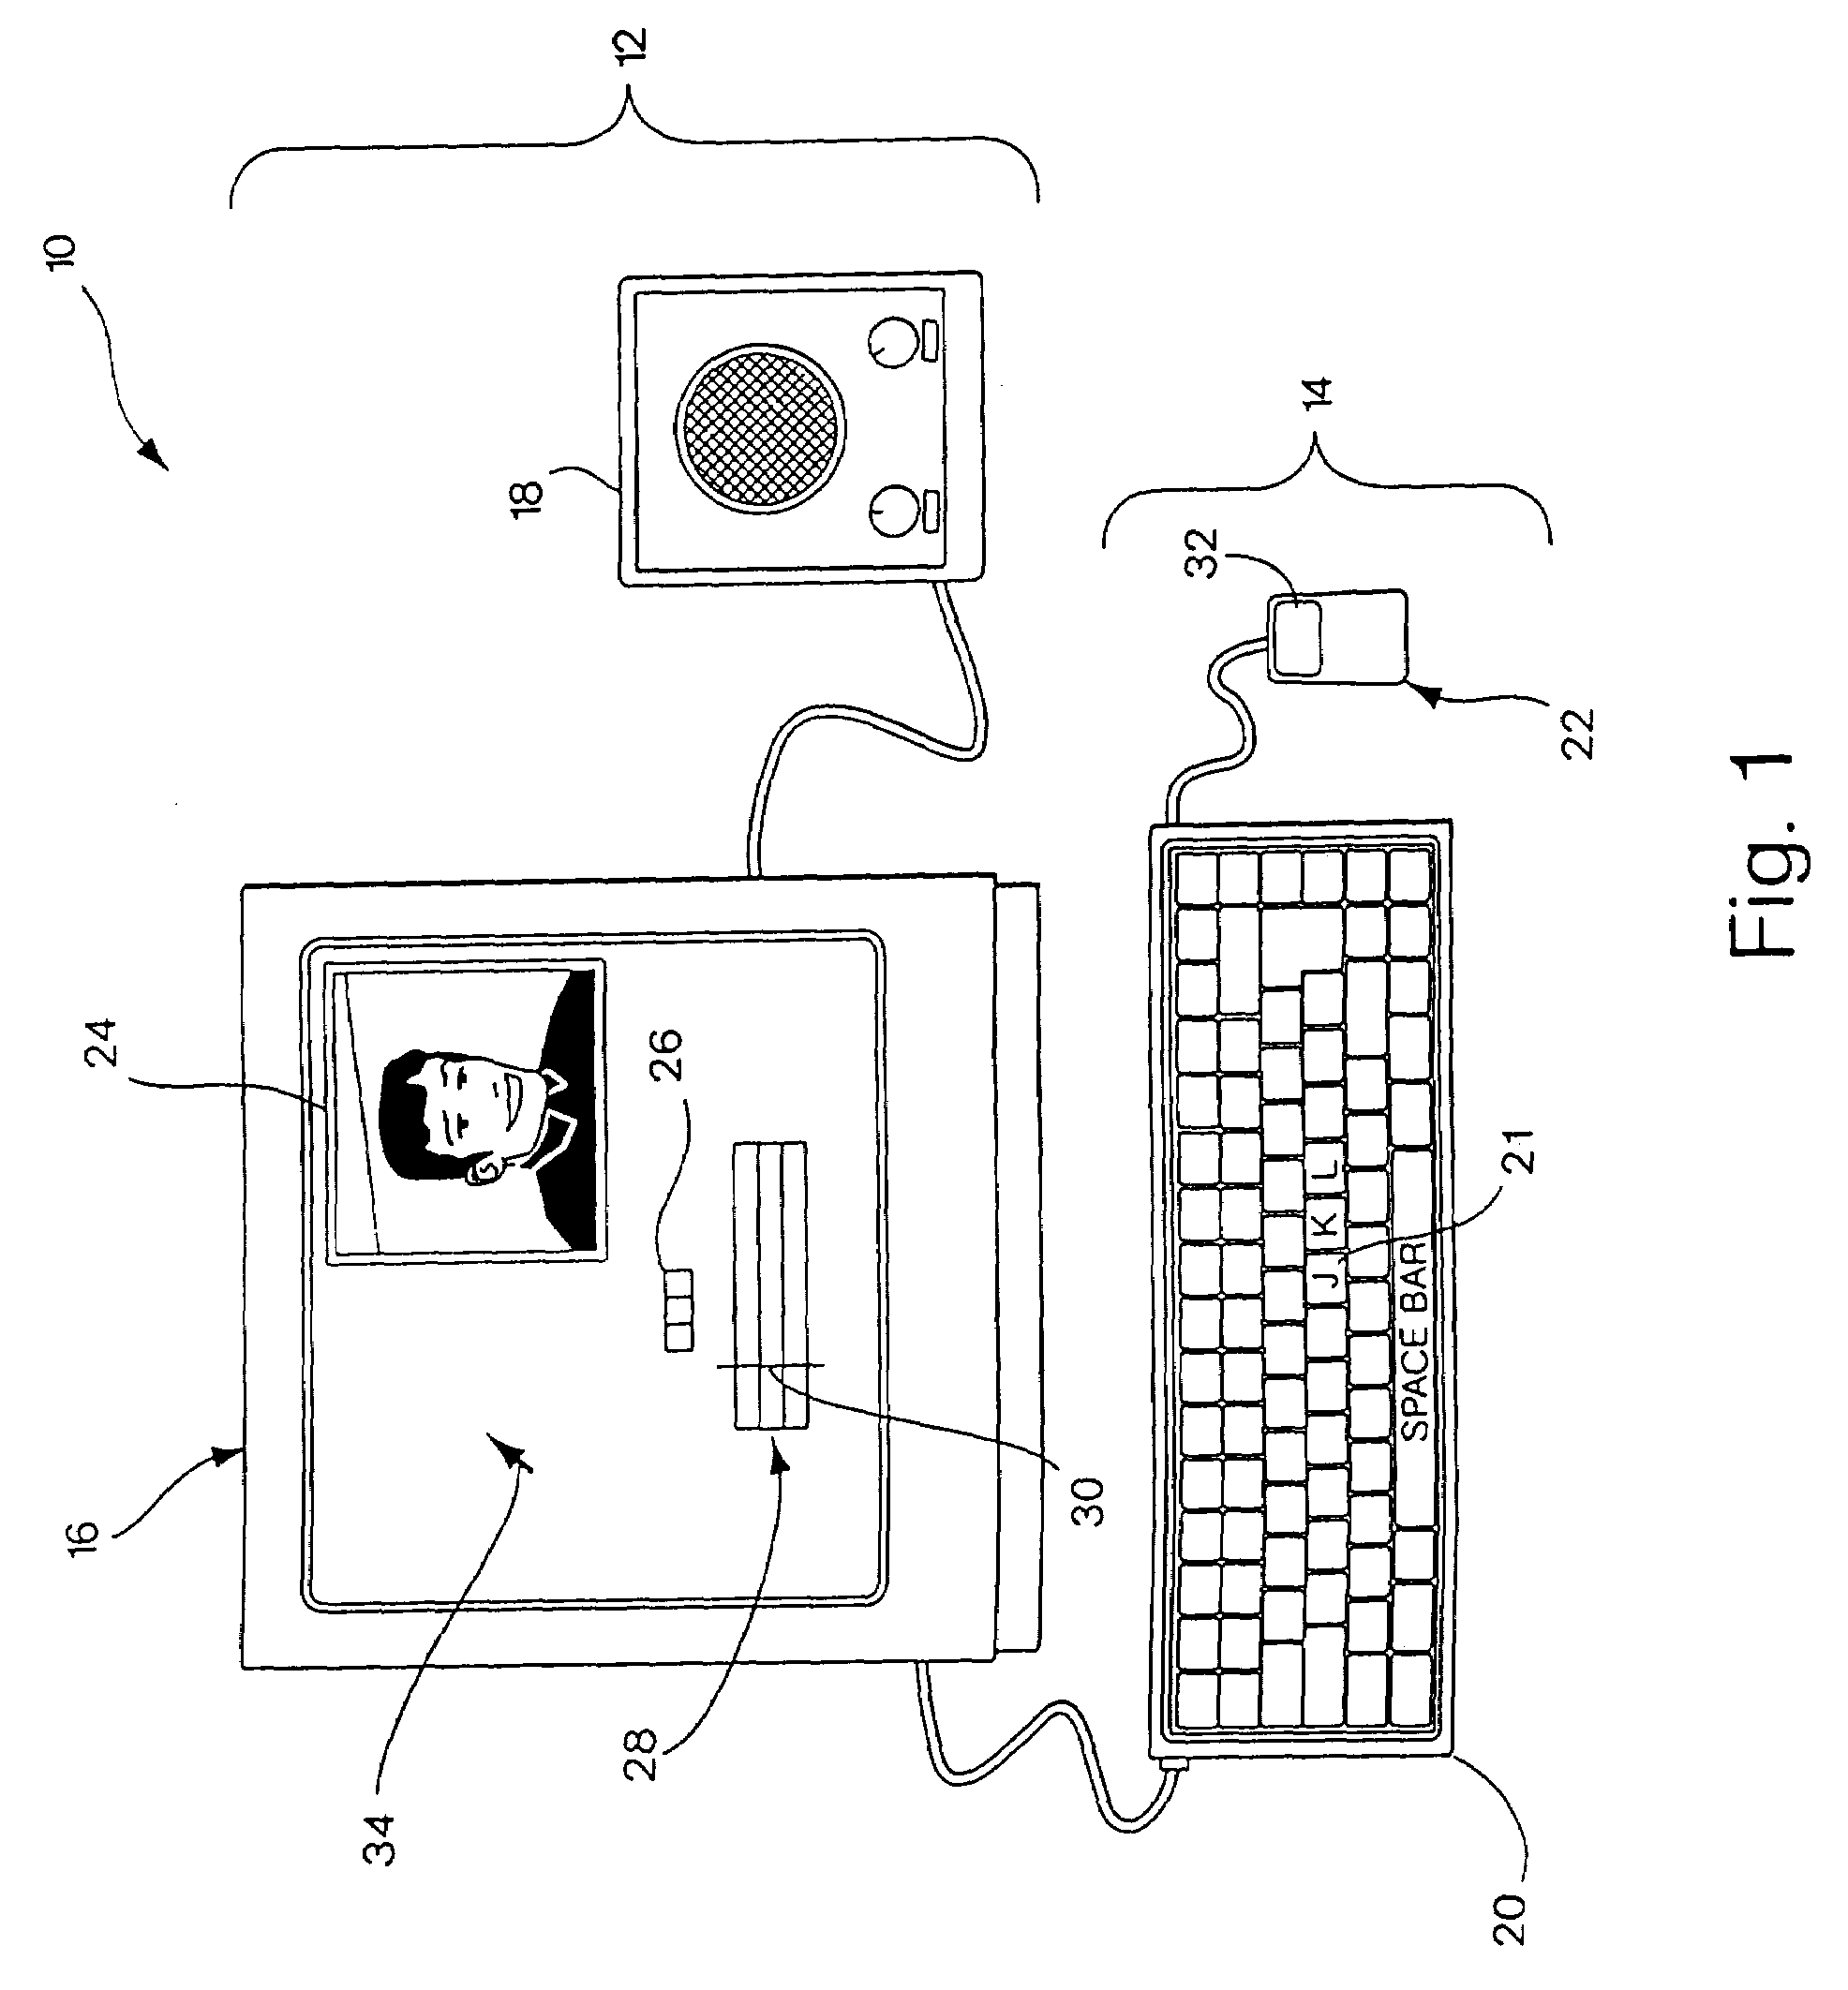 Media composition system with keyboard-based editing controls